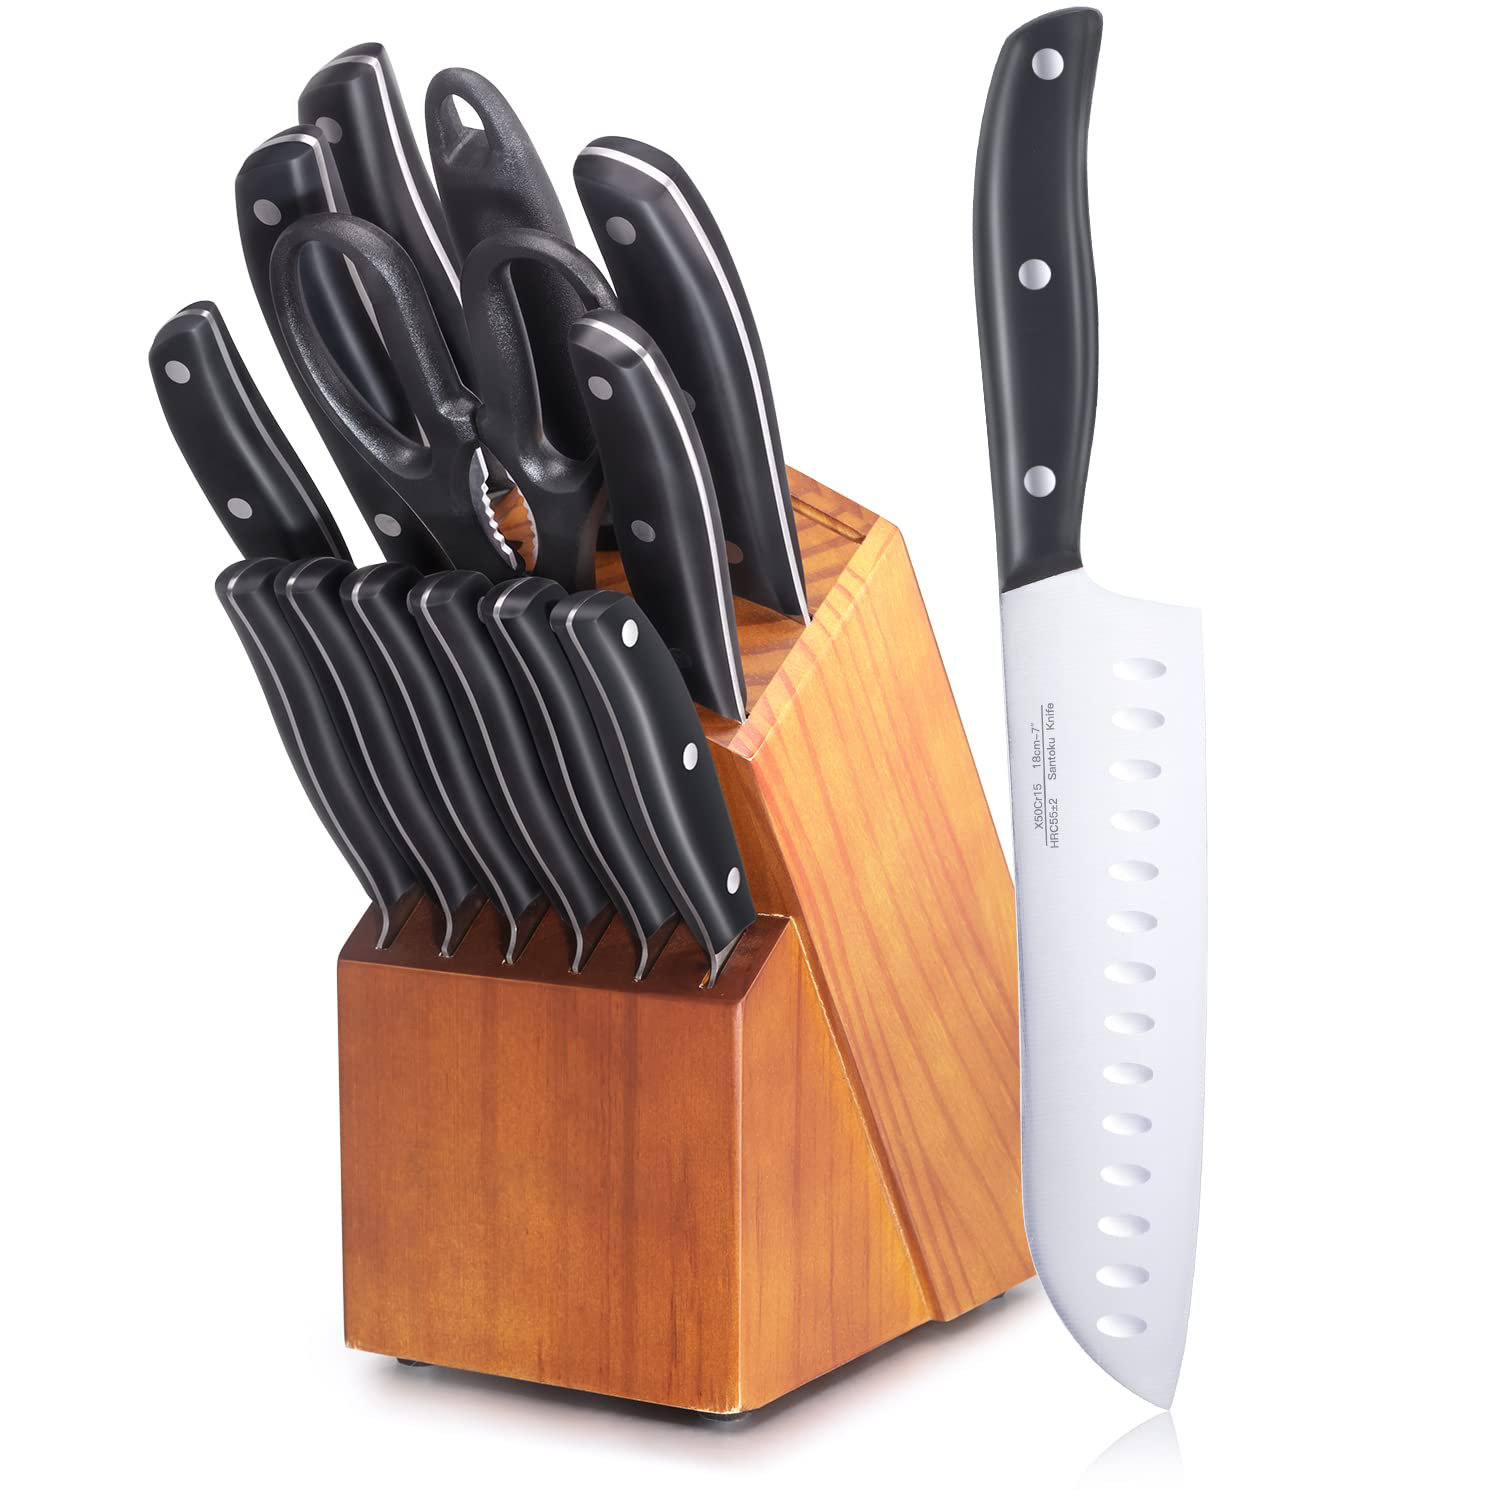 Fish Hunter 15 Piece High Carbon Stainless Steel Knife Block Set